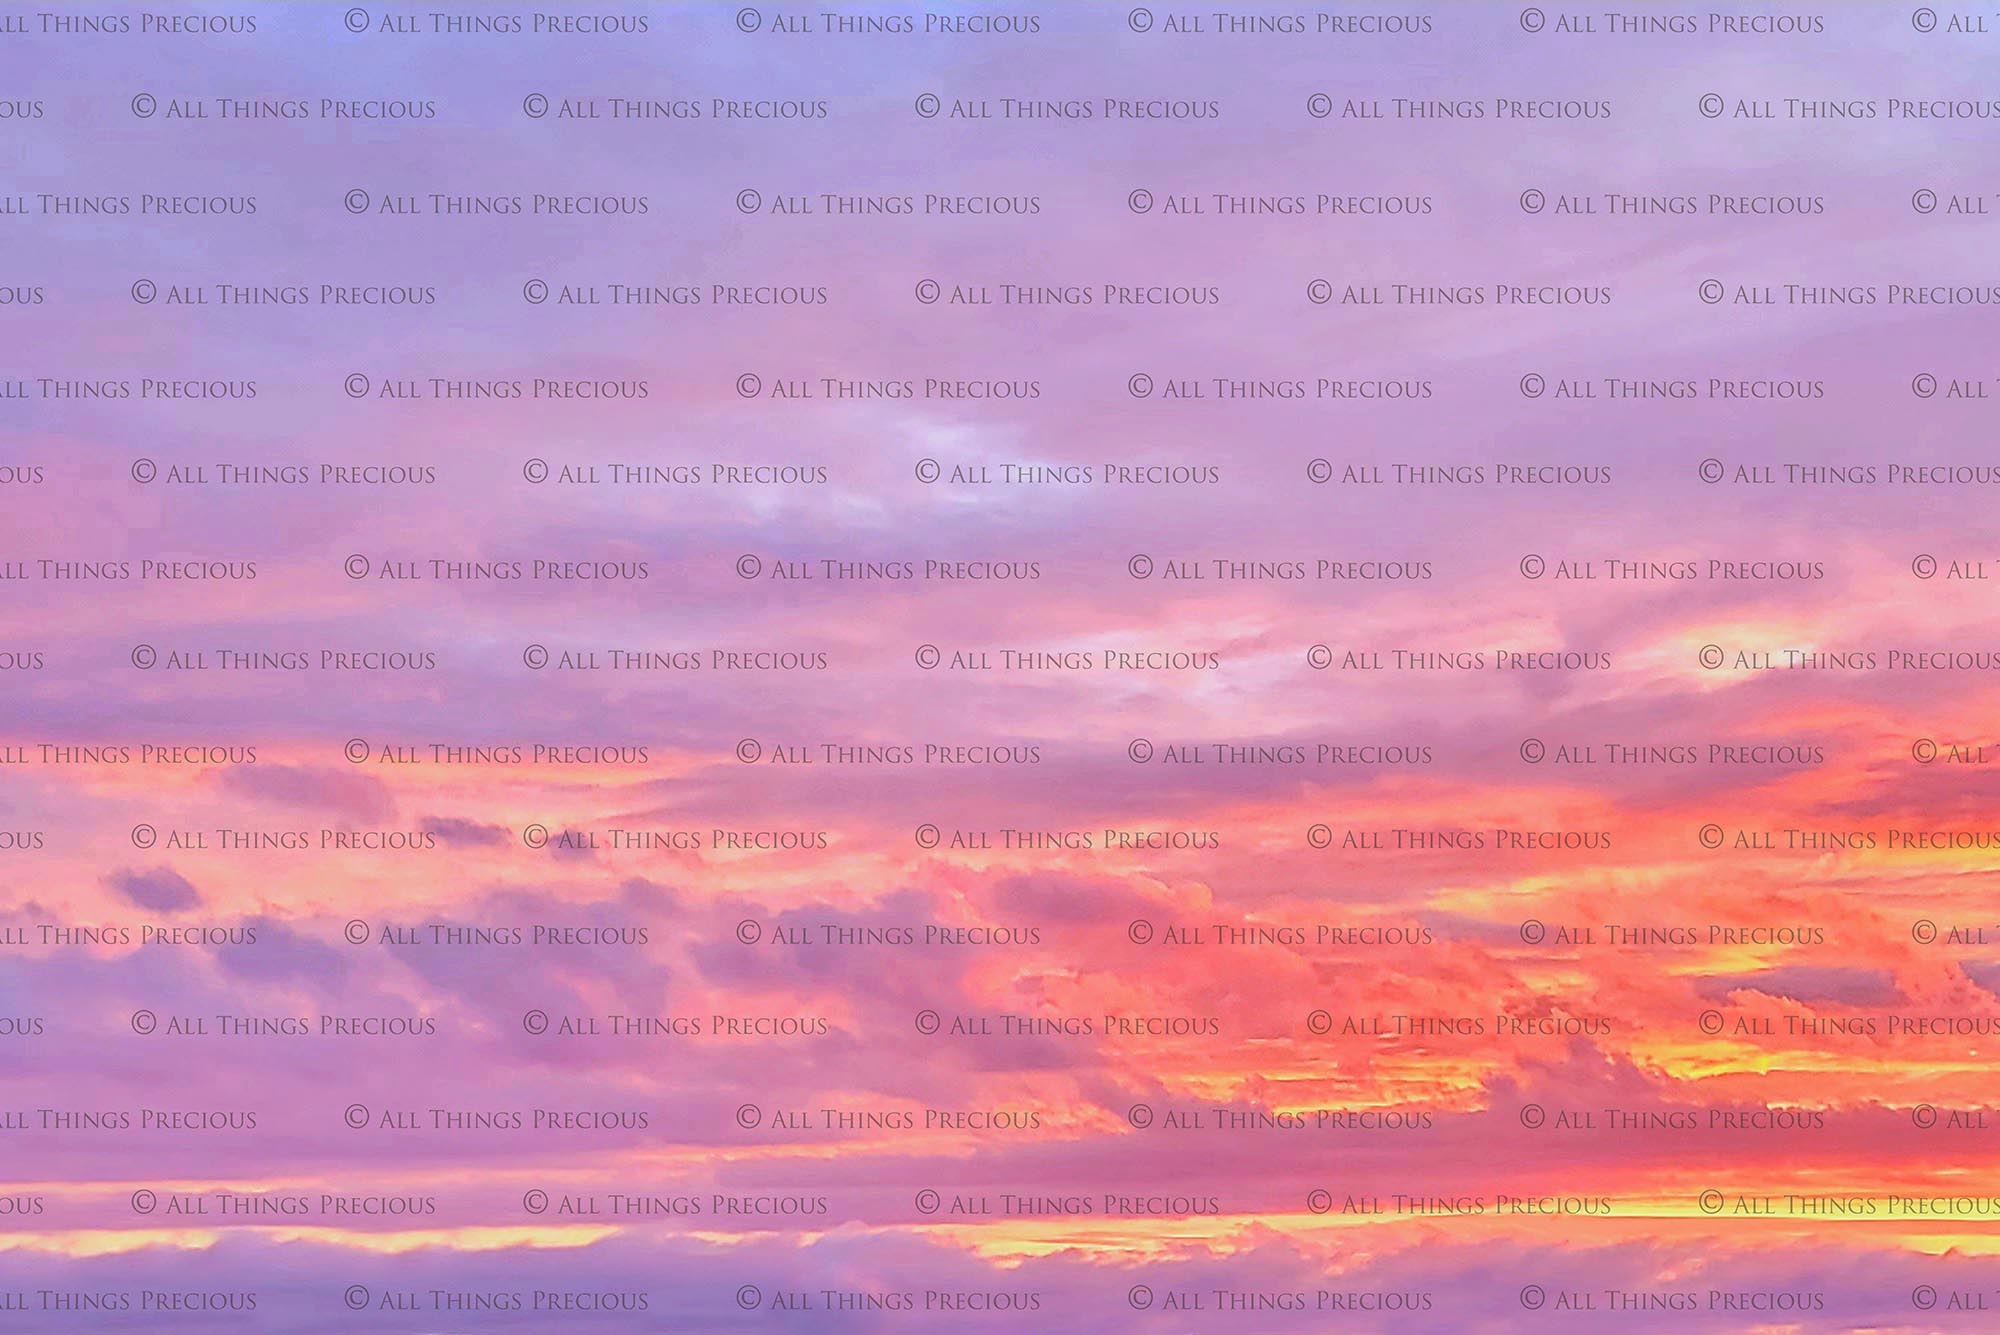 Vibrant Sky Overlays For Photographers, Photoshop, Digital art and Creatives. High resolution for photography and wall art print. These are gorgeous Photography overlays for fantasy digital art and Child portraiture. Landscape clouds with sunset, sunrise and flare. Graphic digital assets for design. Atp Textures